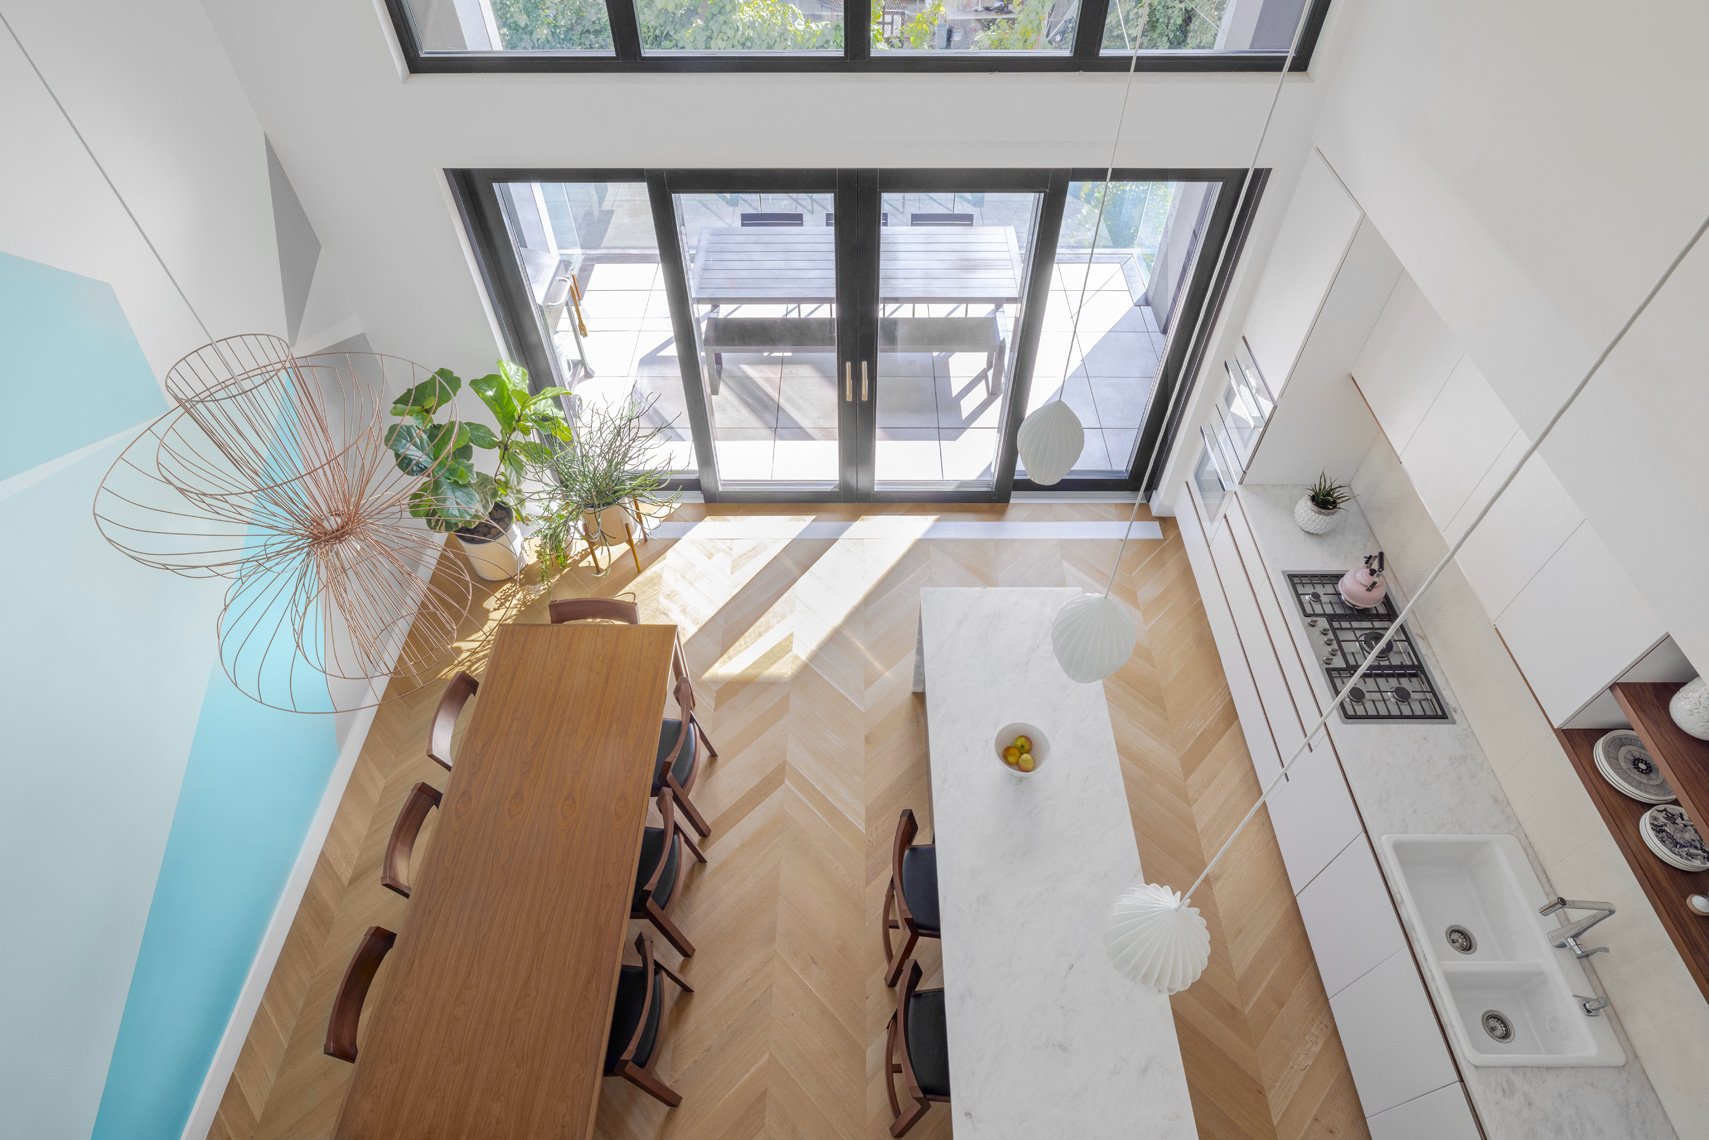 Williamsburg Townhouse kitchen dining from above